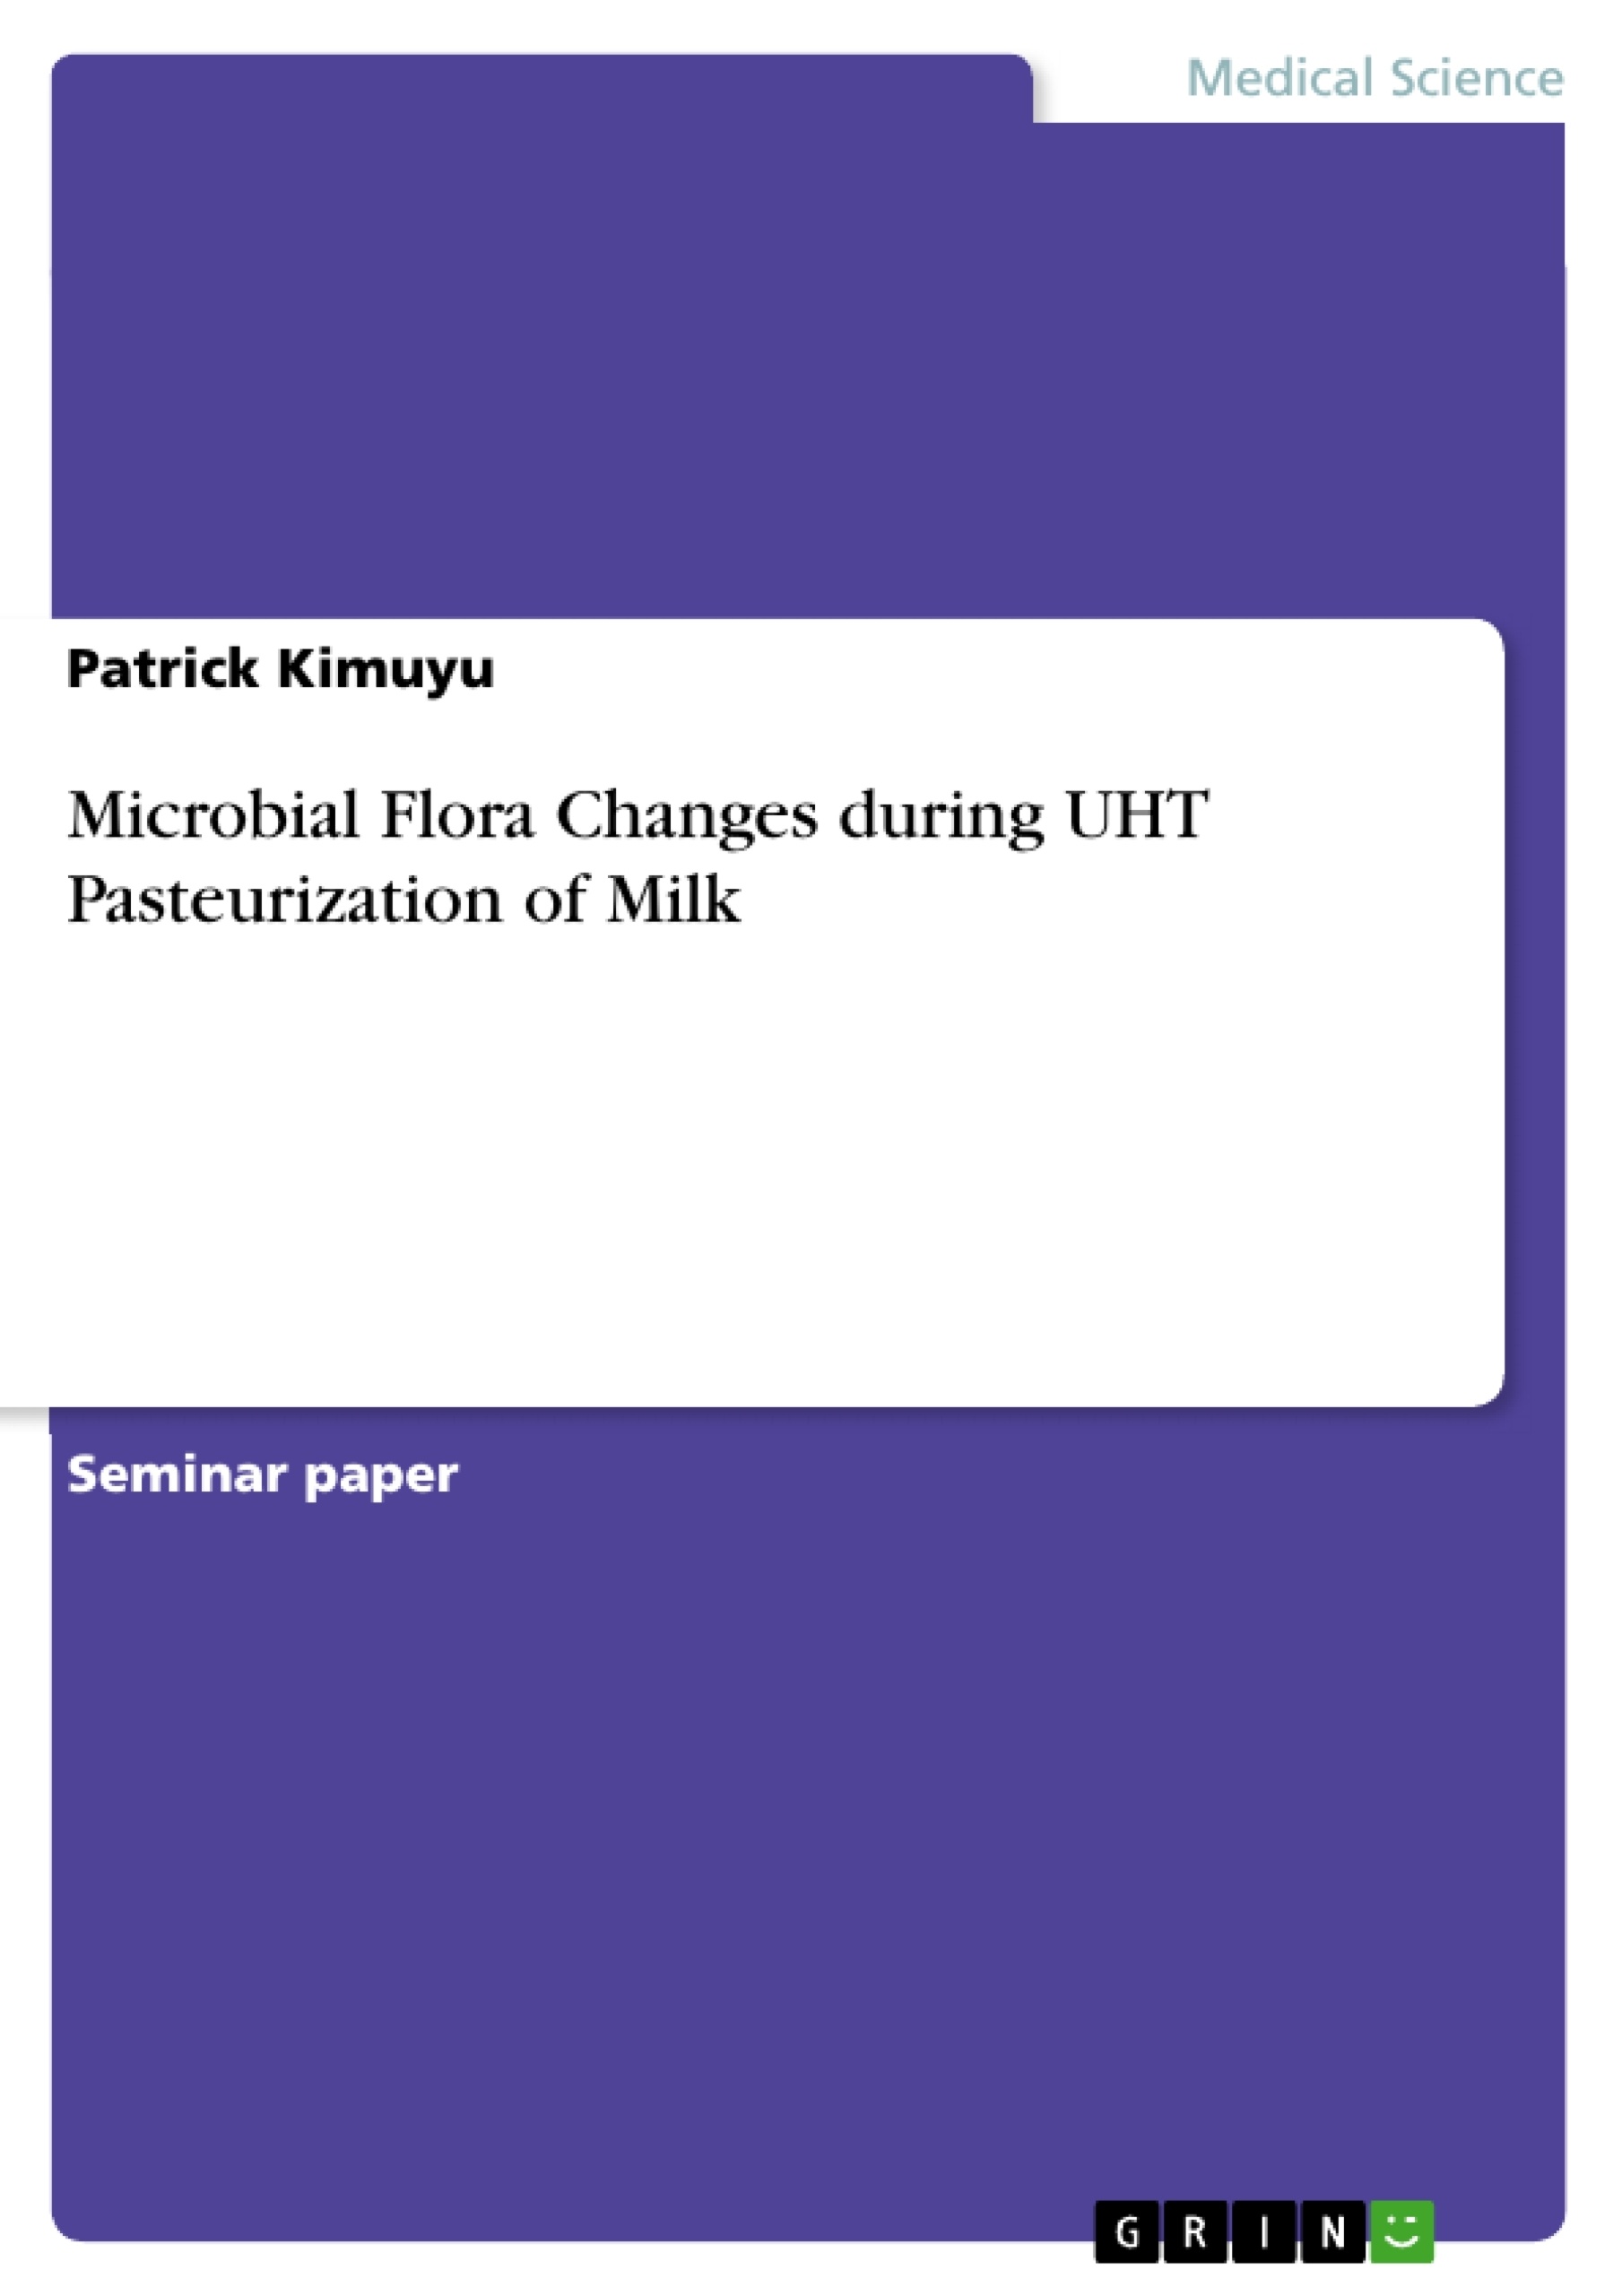 Título: Microbial Flora Changes during UHT Pasteurization of Milk